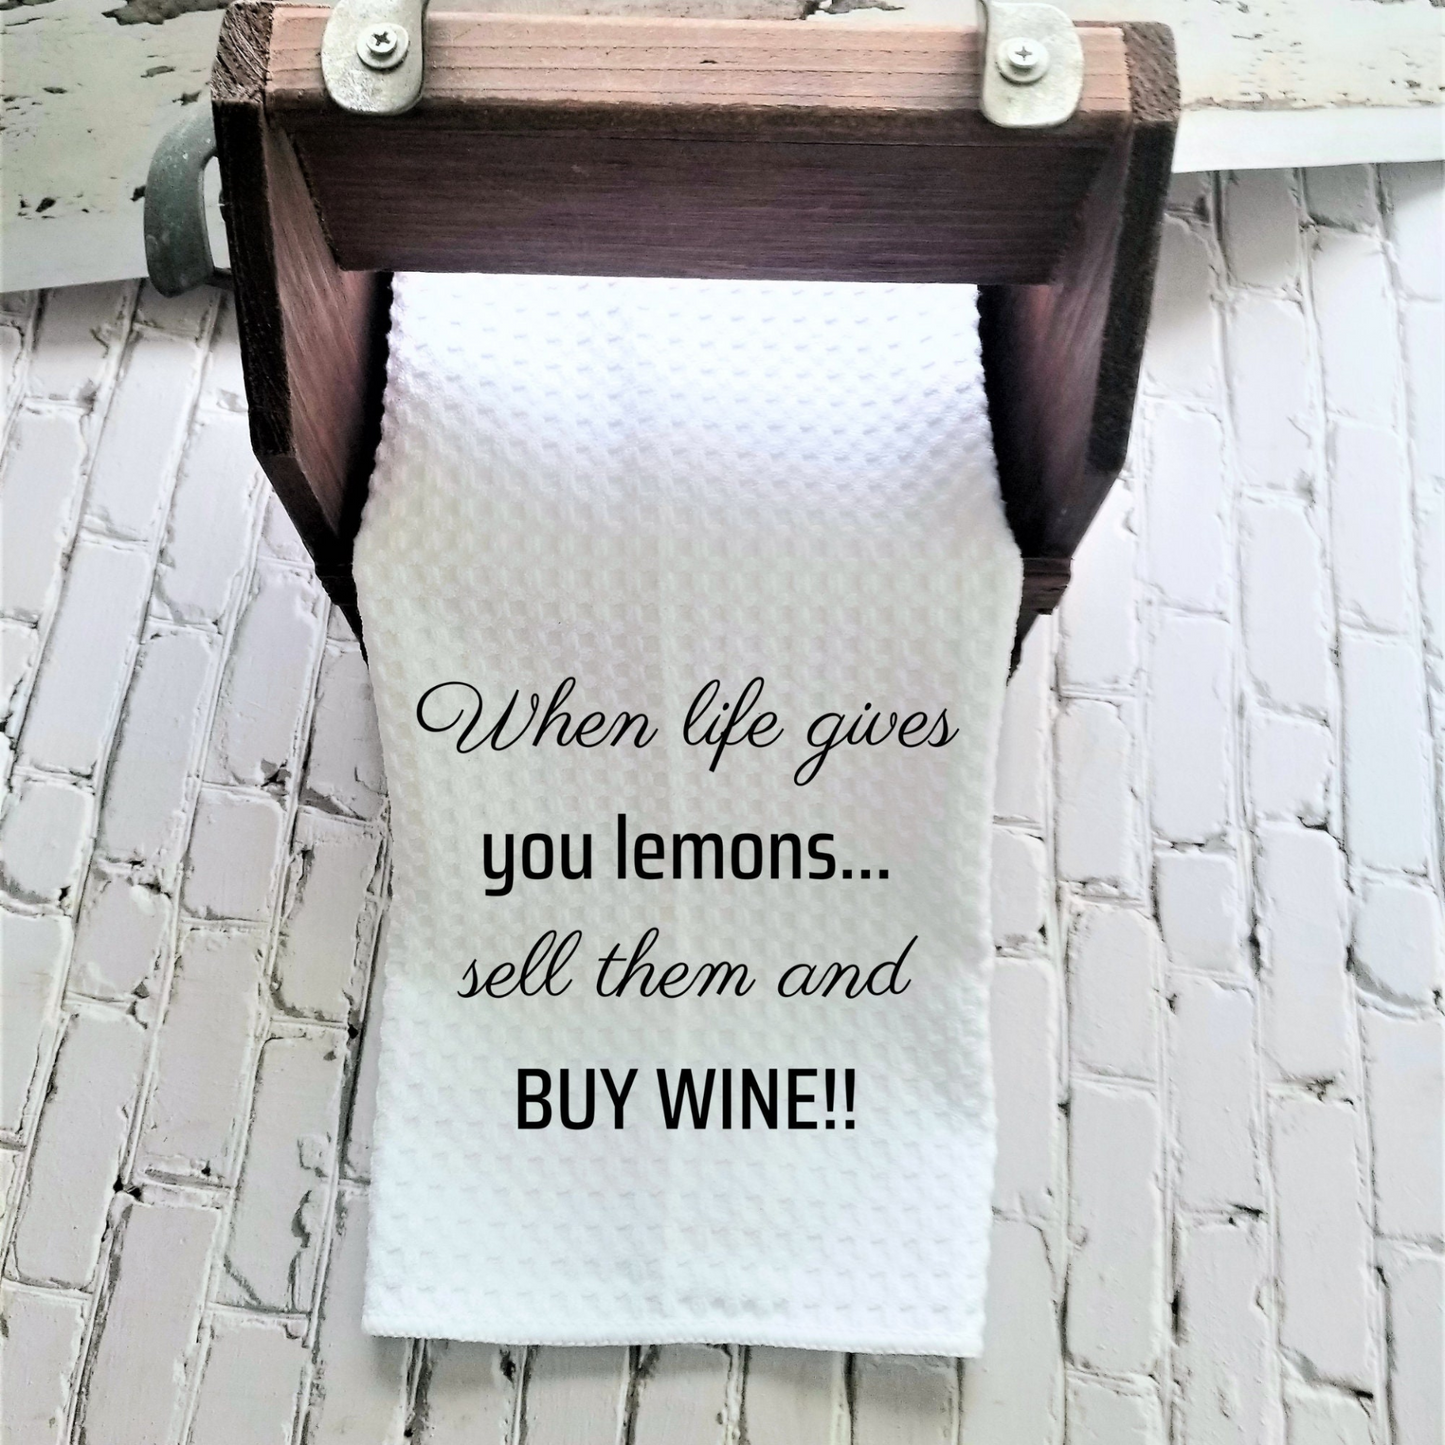 Buy Wine Funny Kitchen Towel Sayings | Farmhouse Sarcastic Dish Towel with Quote | Gift for Wine Lover or Cook, Goodies N Stuff